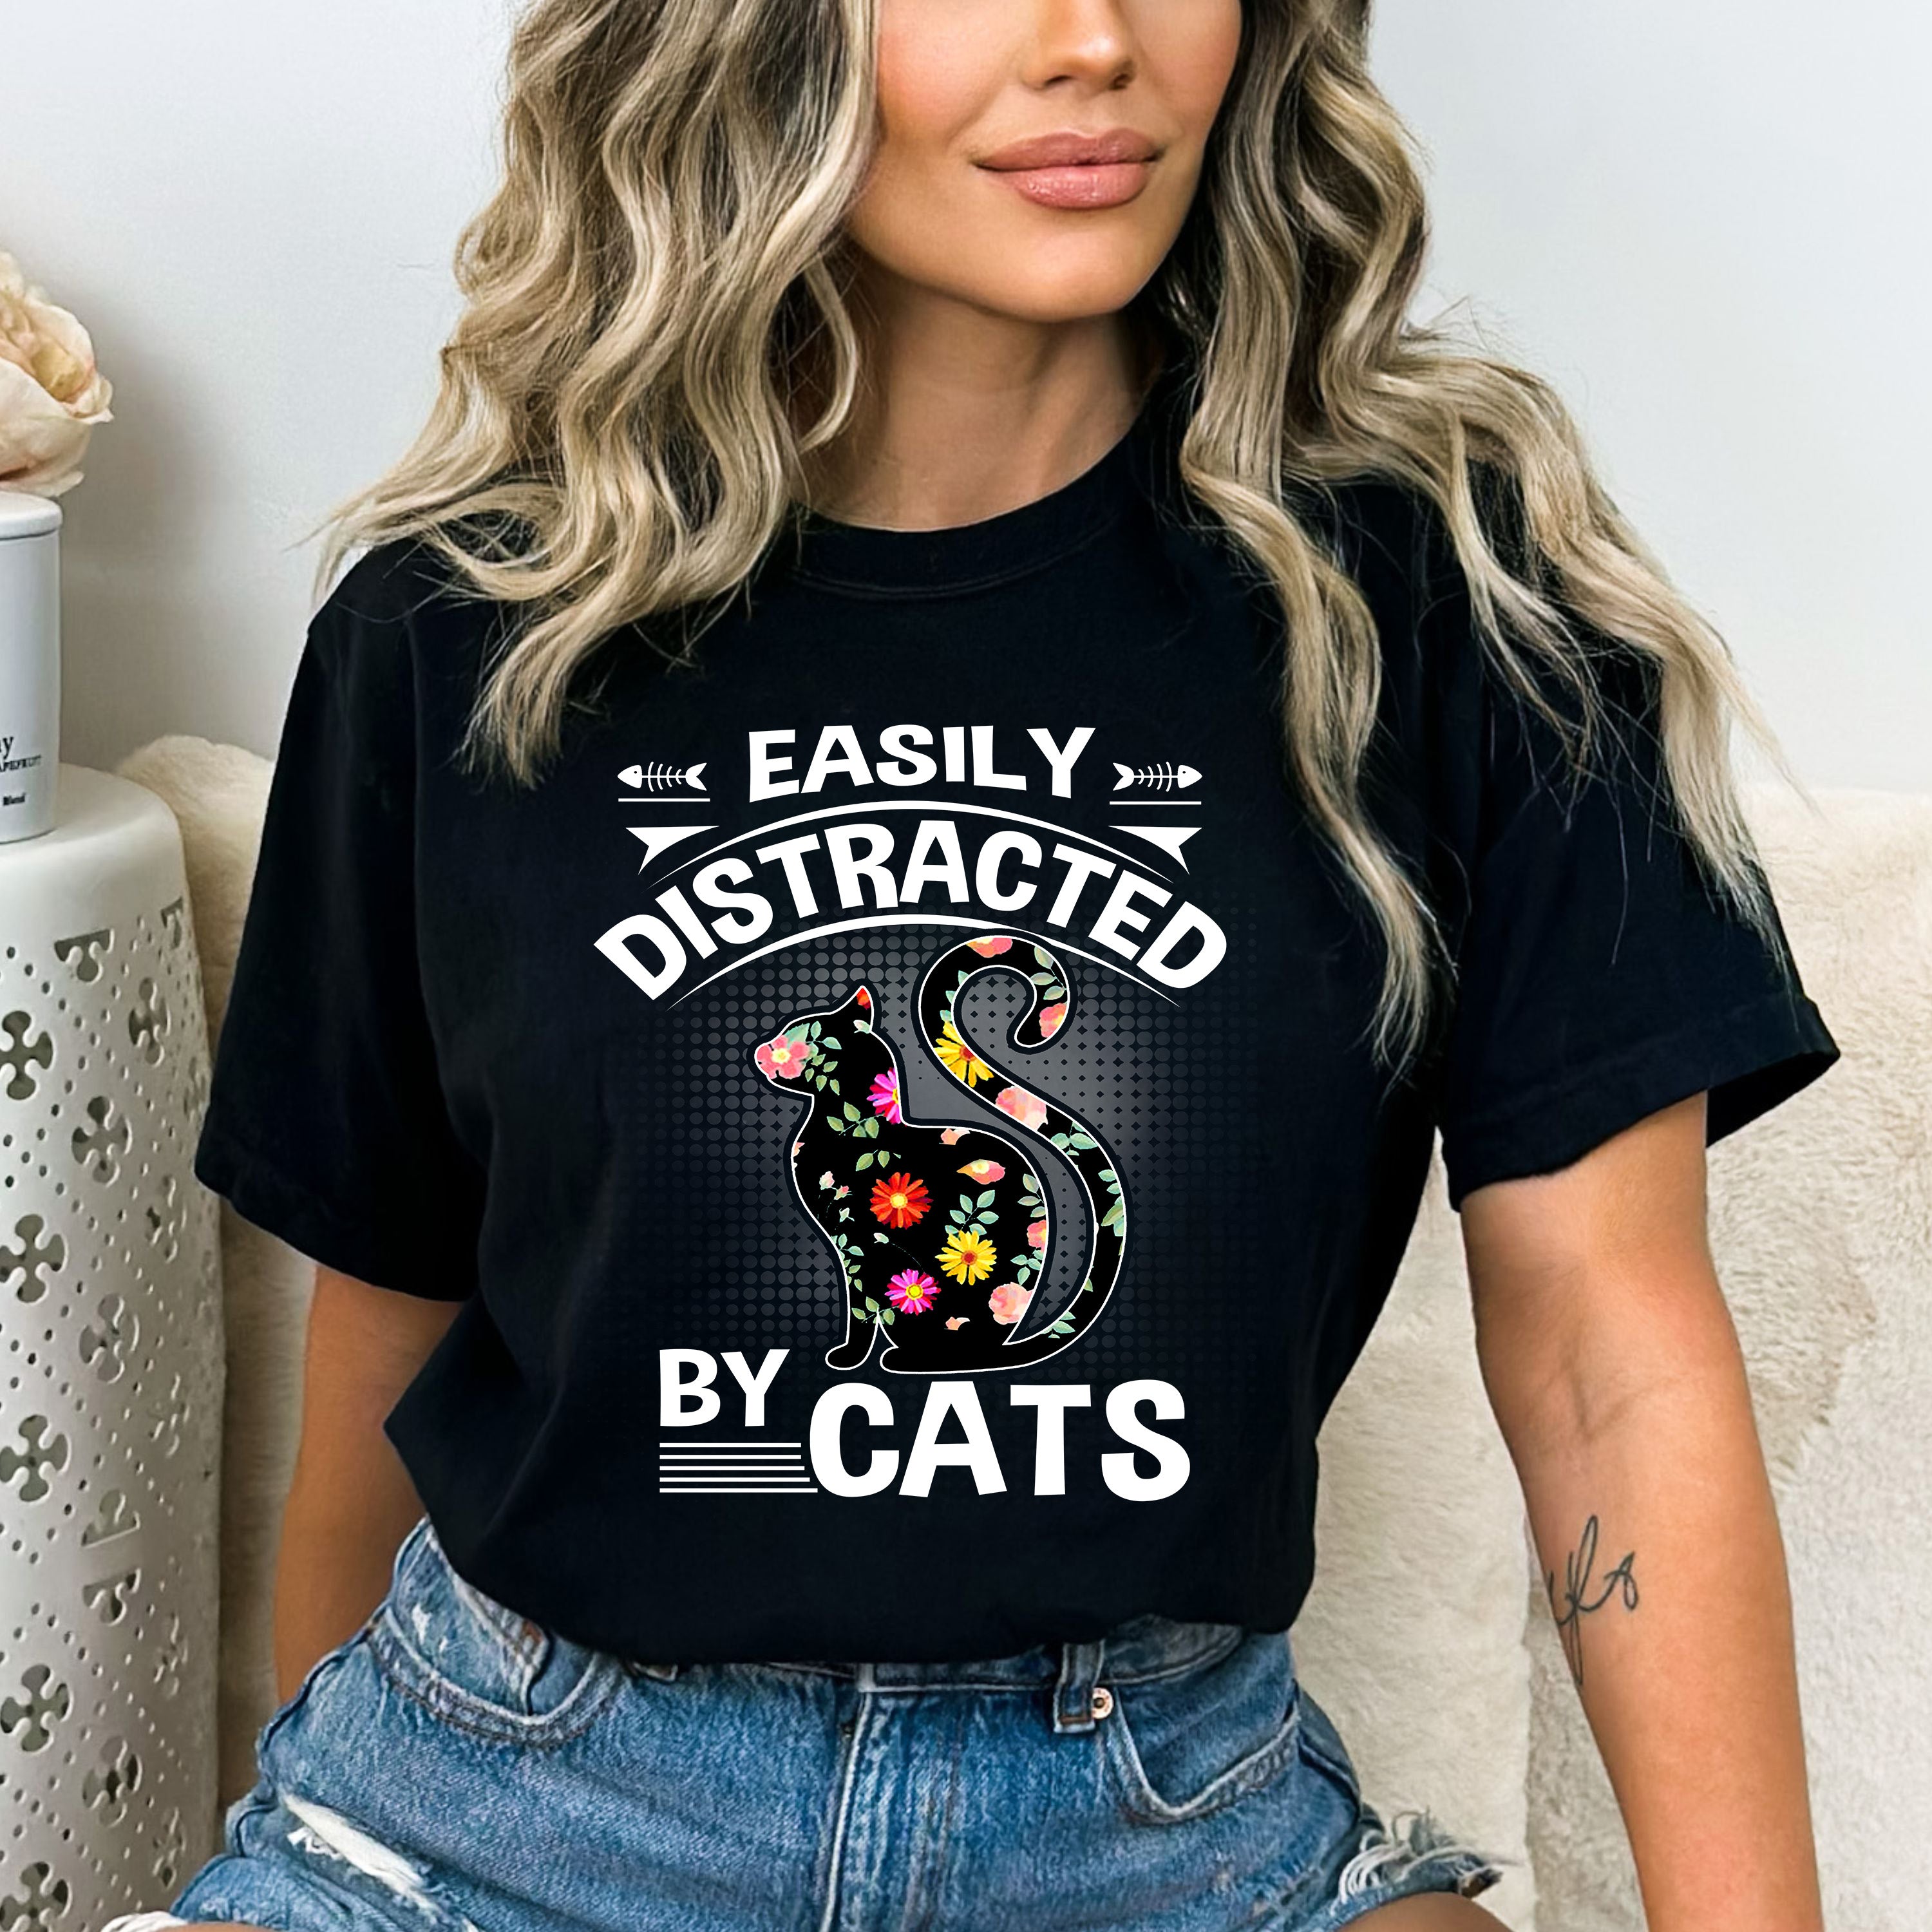 "Easily Distracted By Cats"